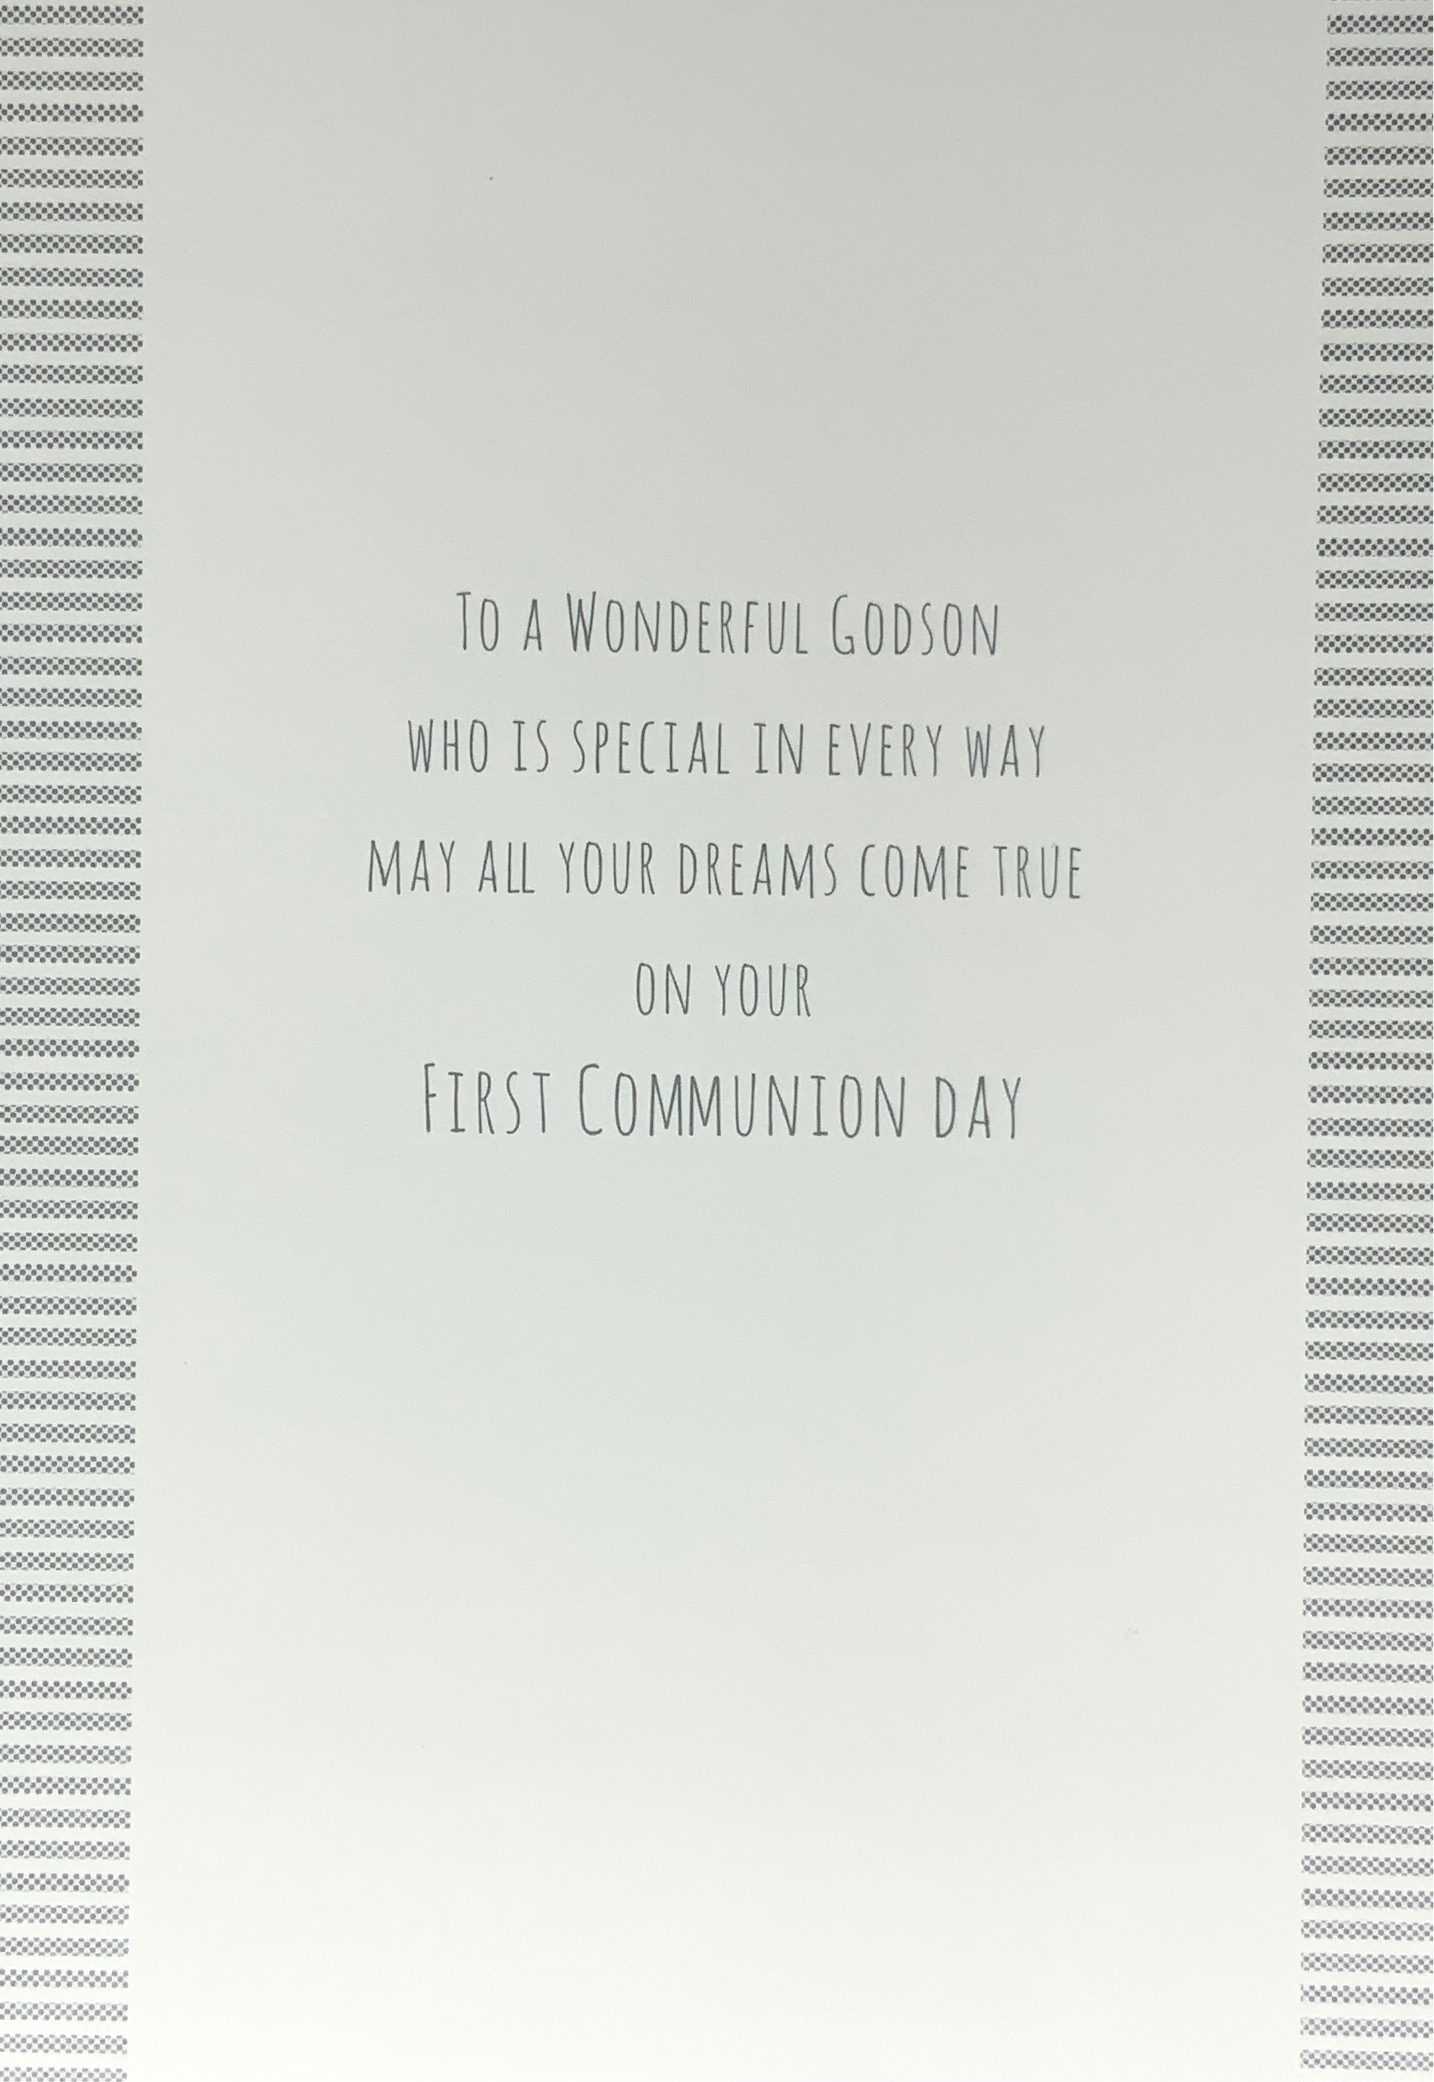 Communion Card - Godson / May All Your Dreams Come True